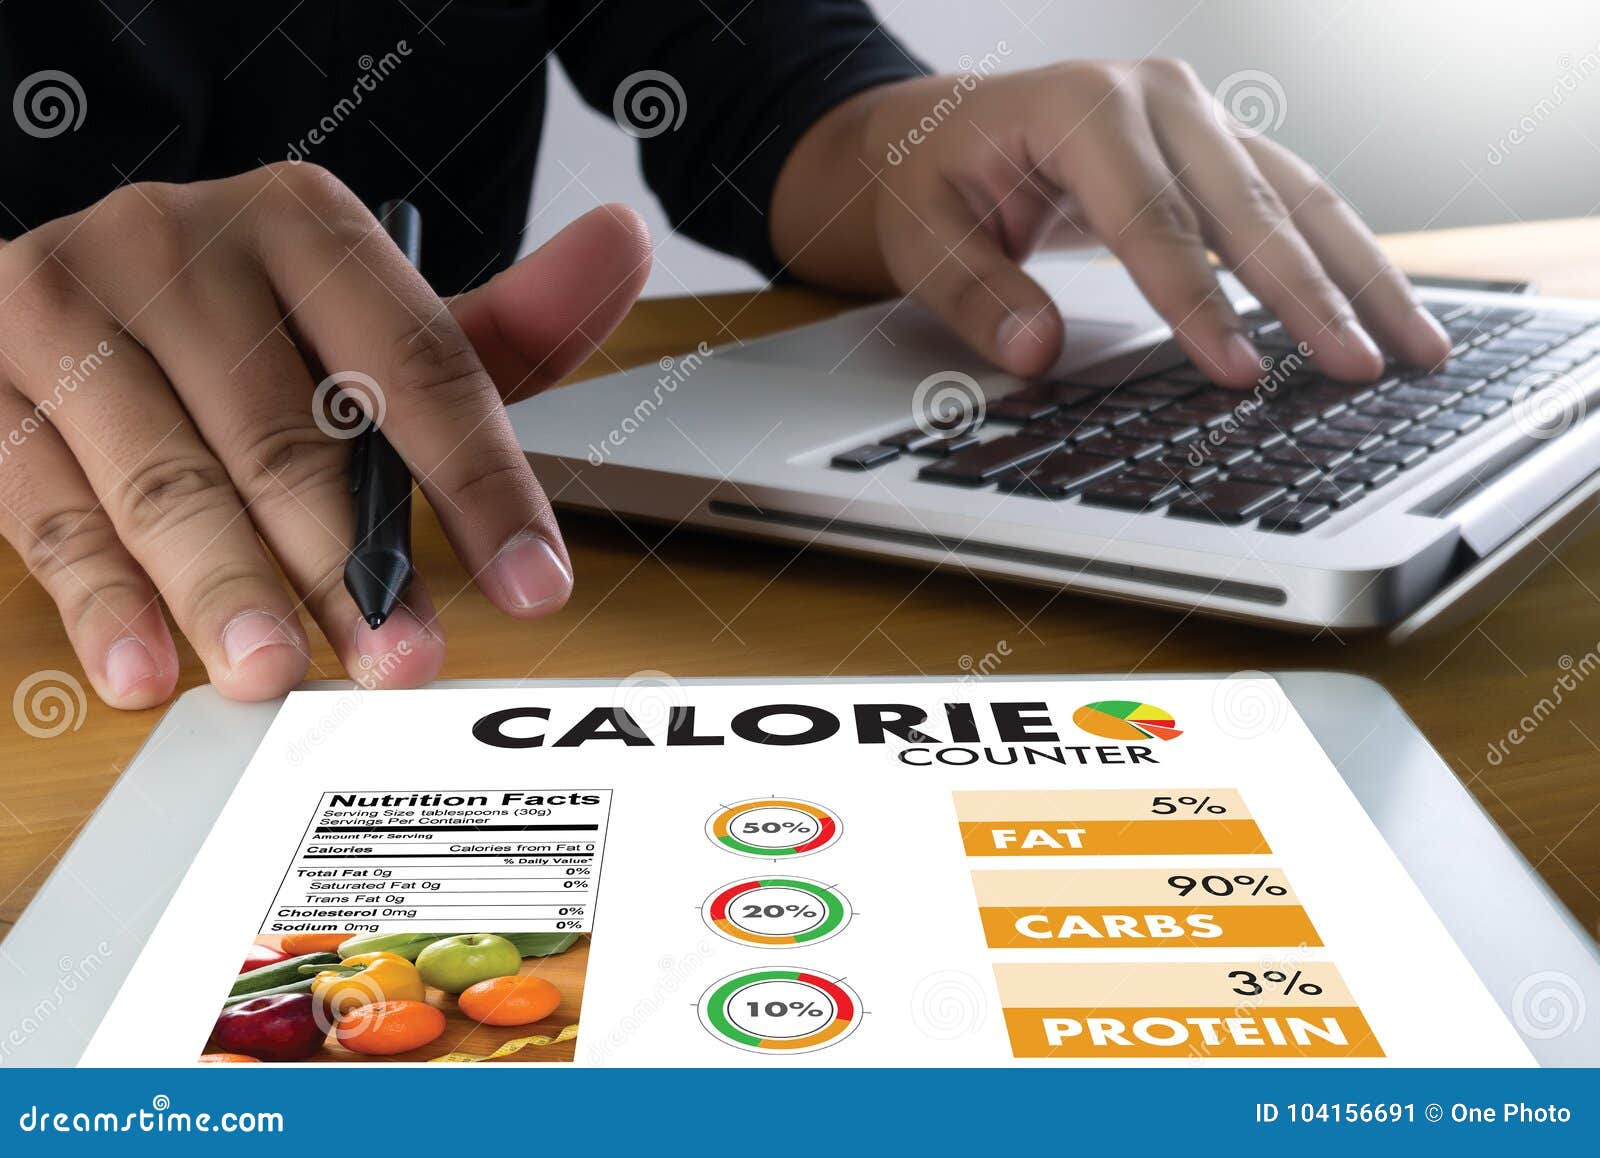 calorie counting counter application medical eating healthy die